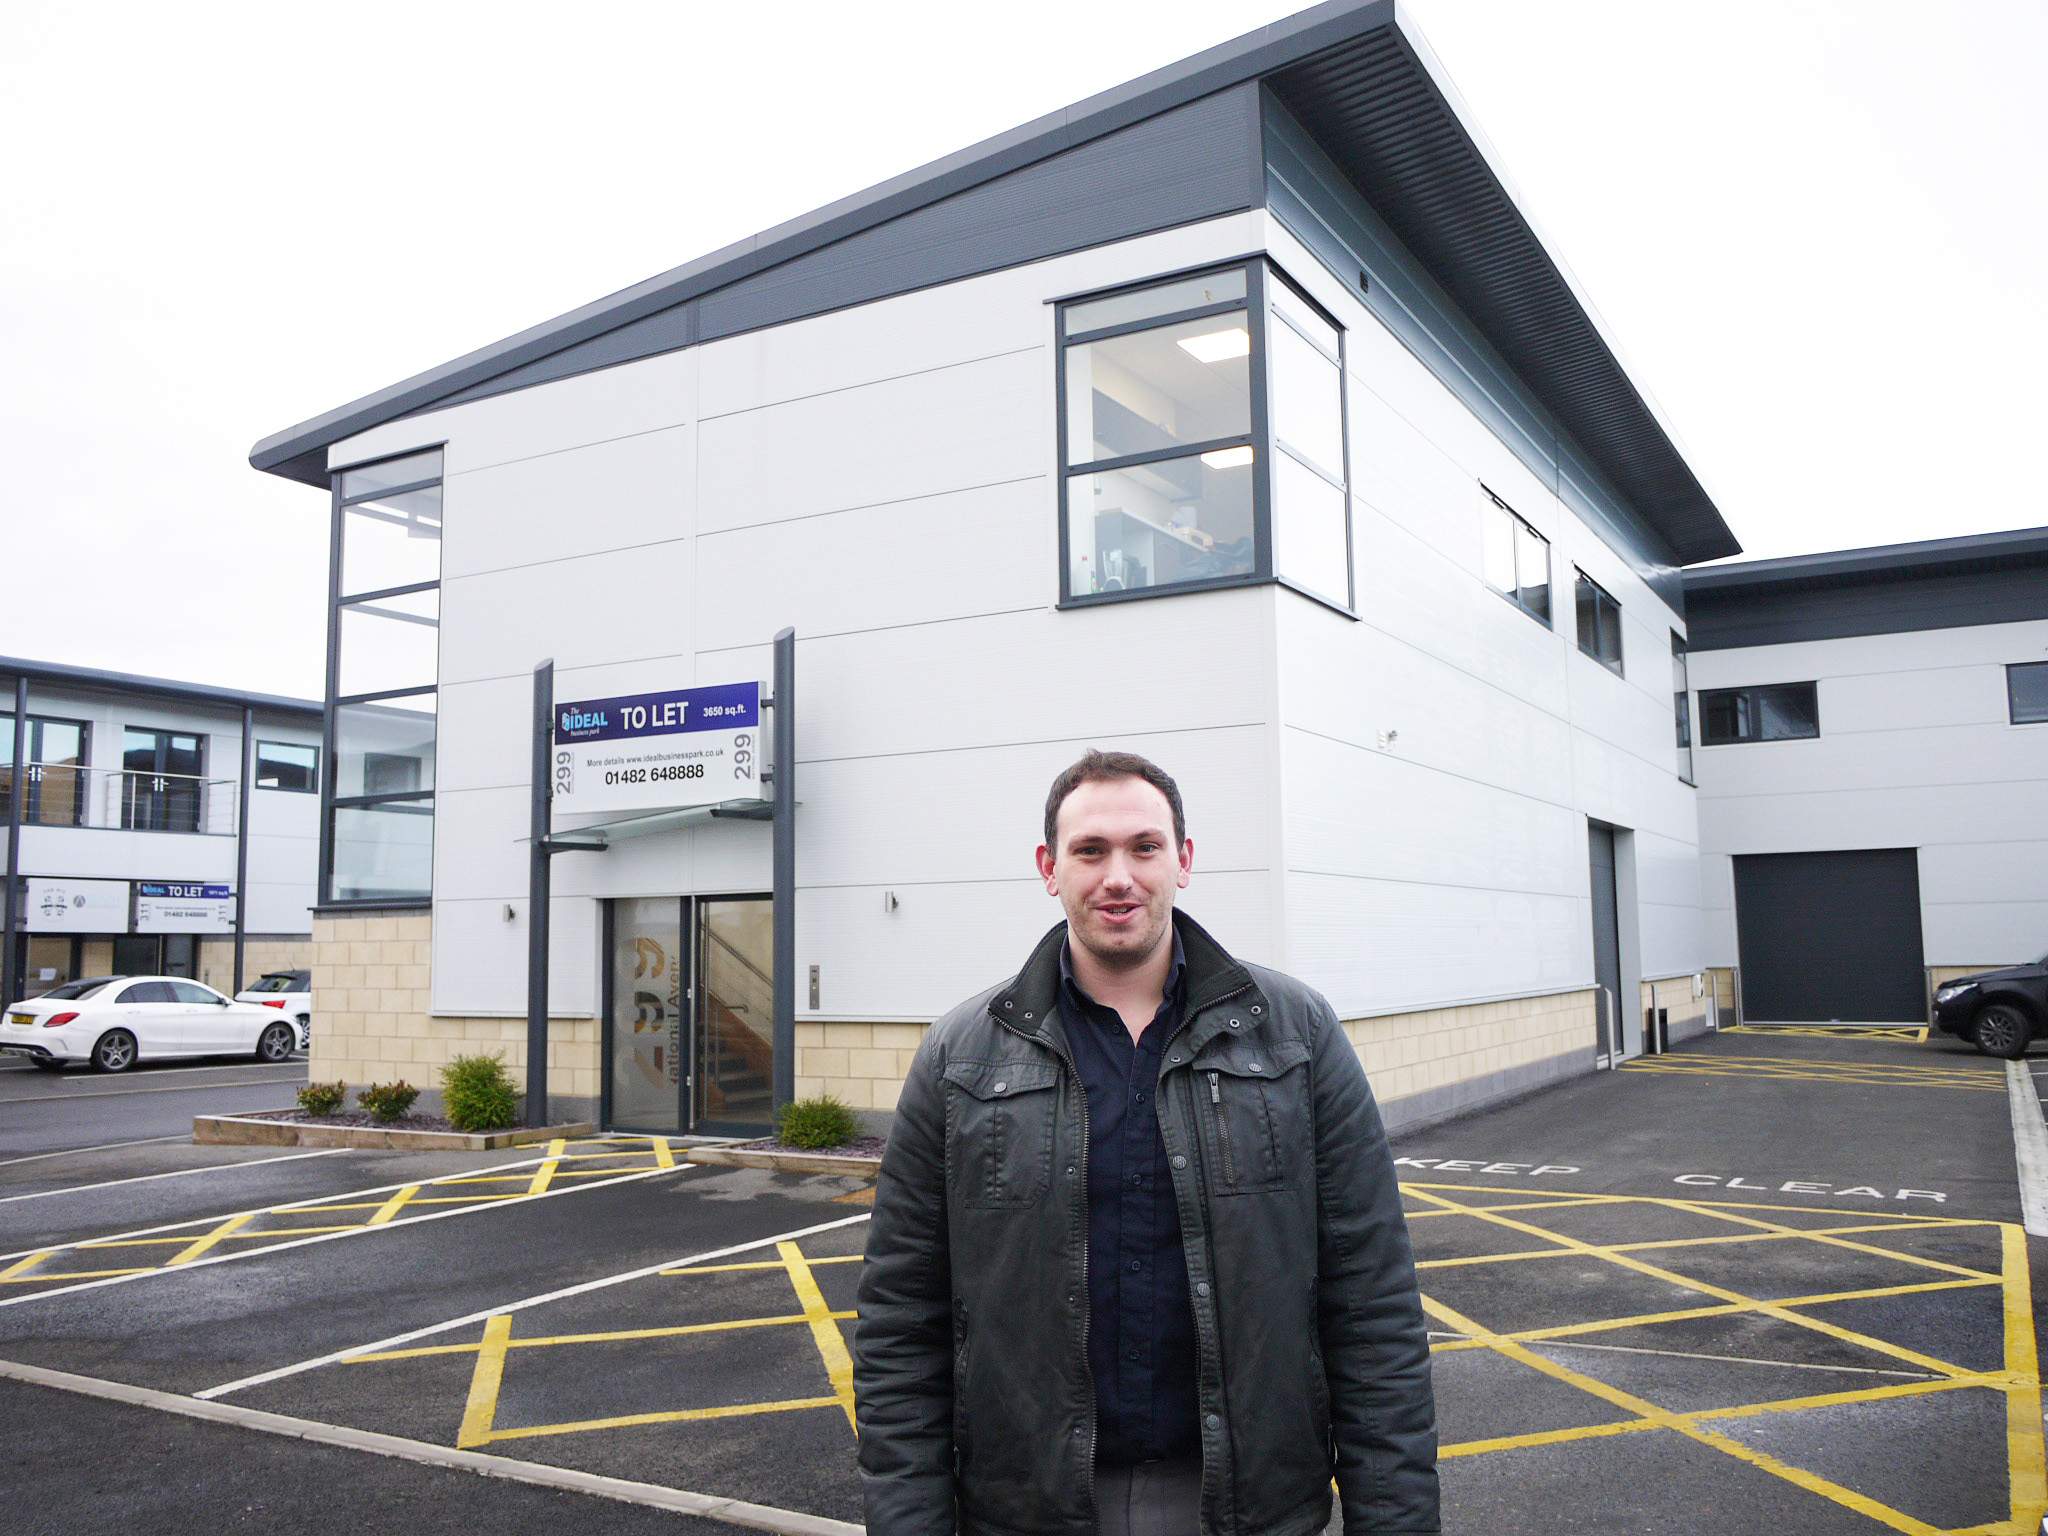 ONLINE PHARMACY MOVES ONTO THE IDEAL BUSINESS PARK